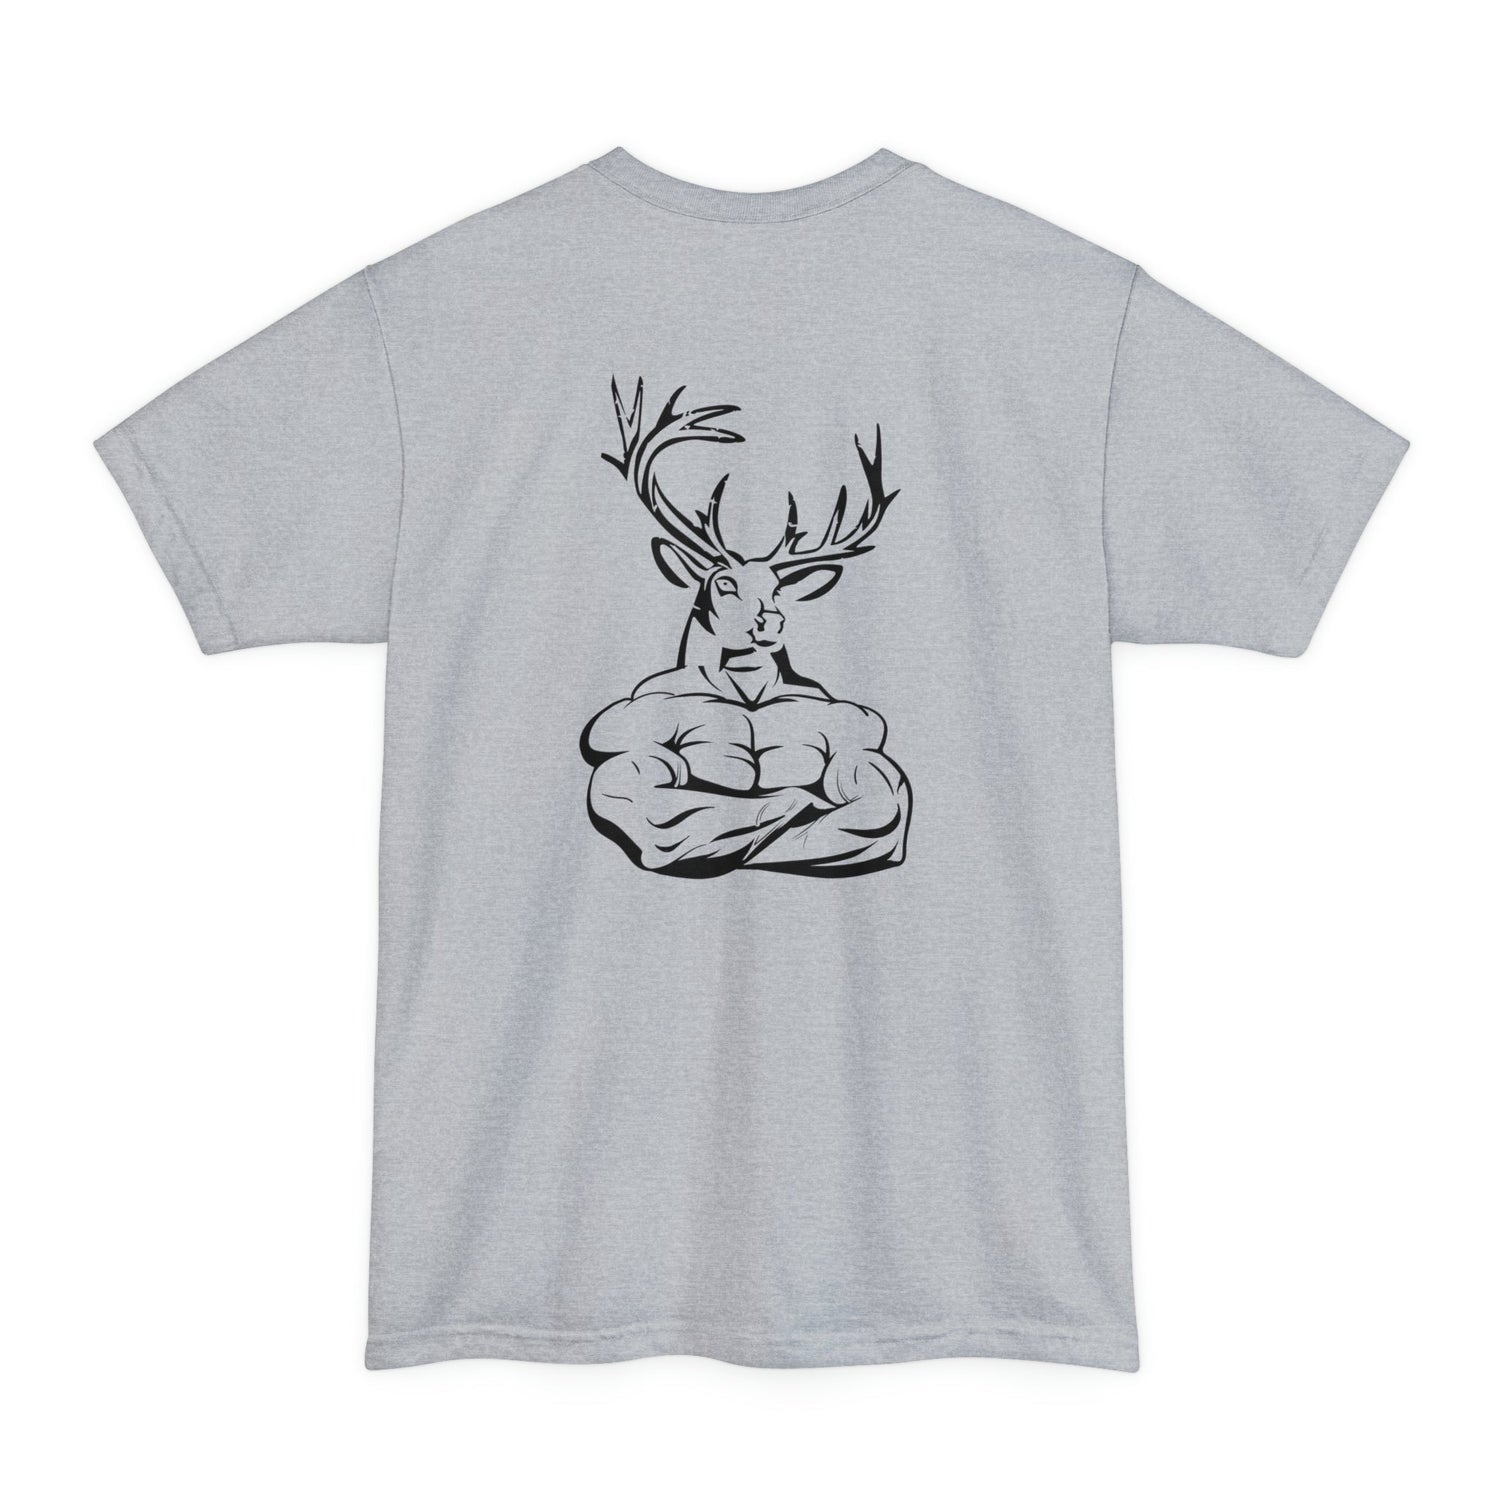 Big and tall deer hunting t-shirt, color light grey, front design placement